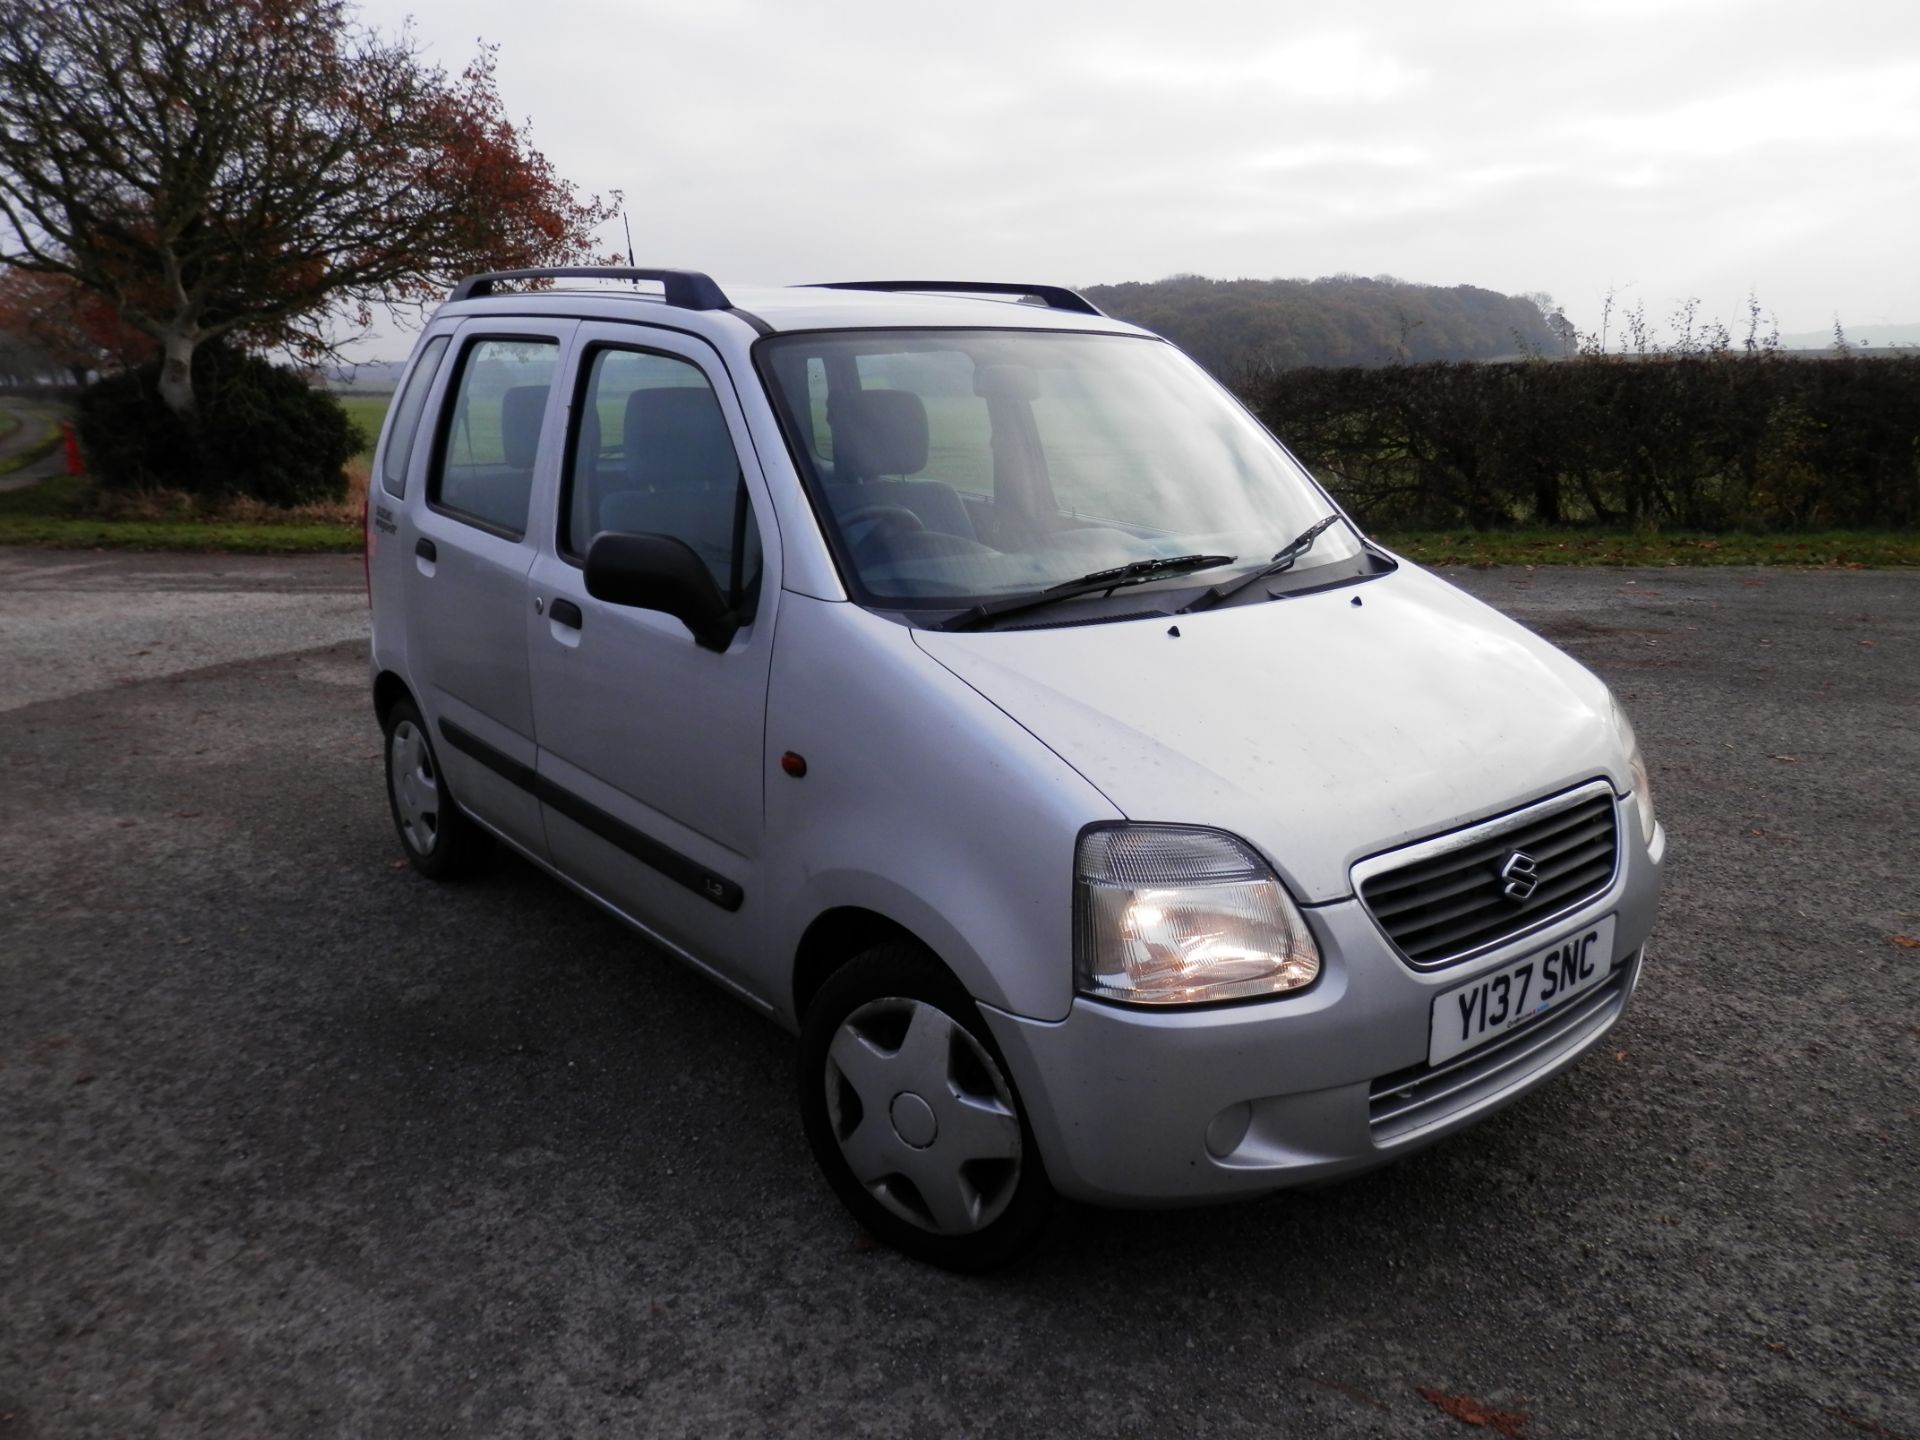 RESERVE NOW REMOVED ! Y REG/2001 SUZUKI WAGON R 1.3 GL. 106K MILES, MOT JULY 2017. HISTORY TO 2014. - Image 8 of 24